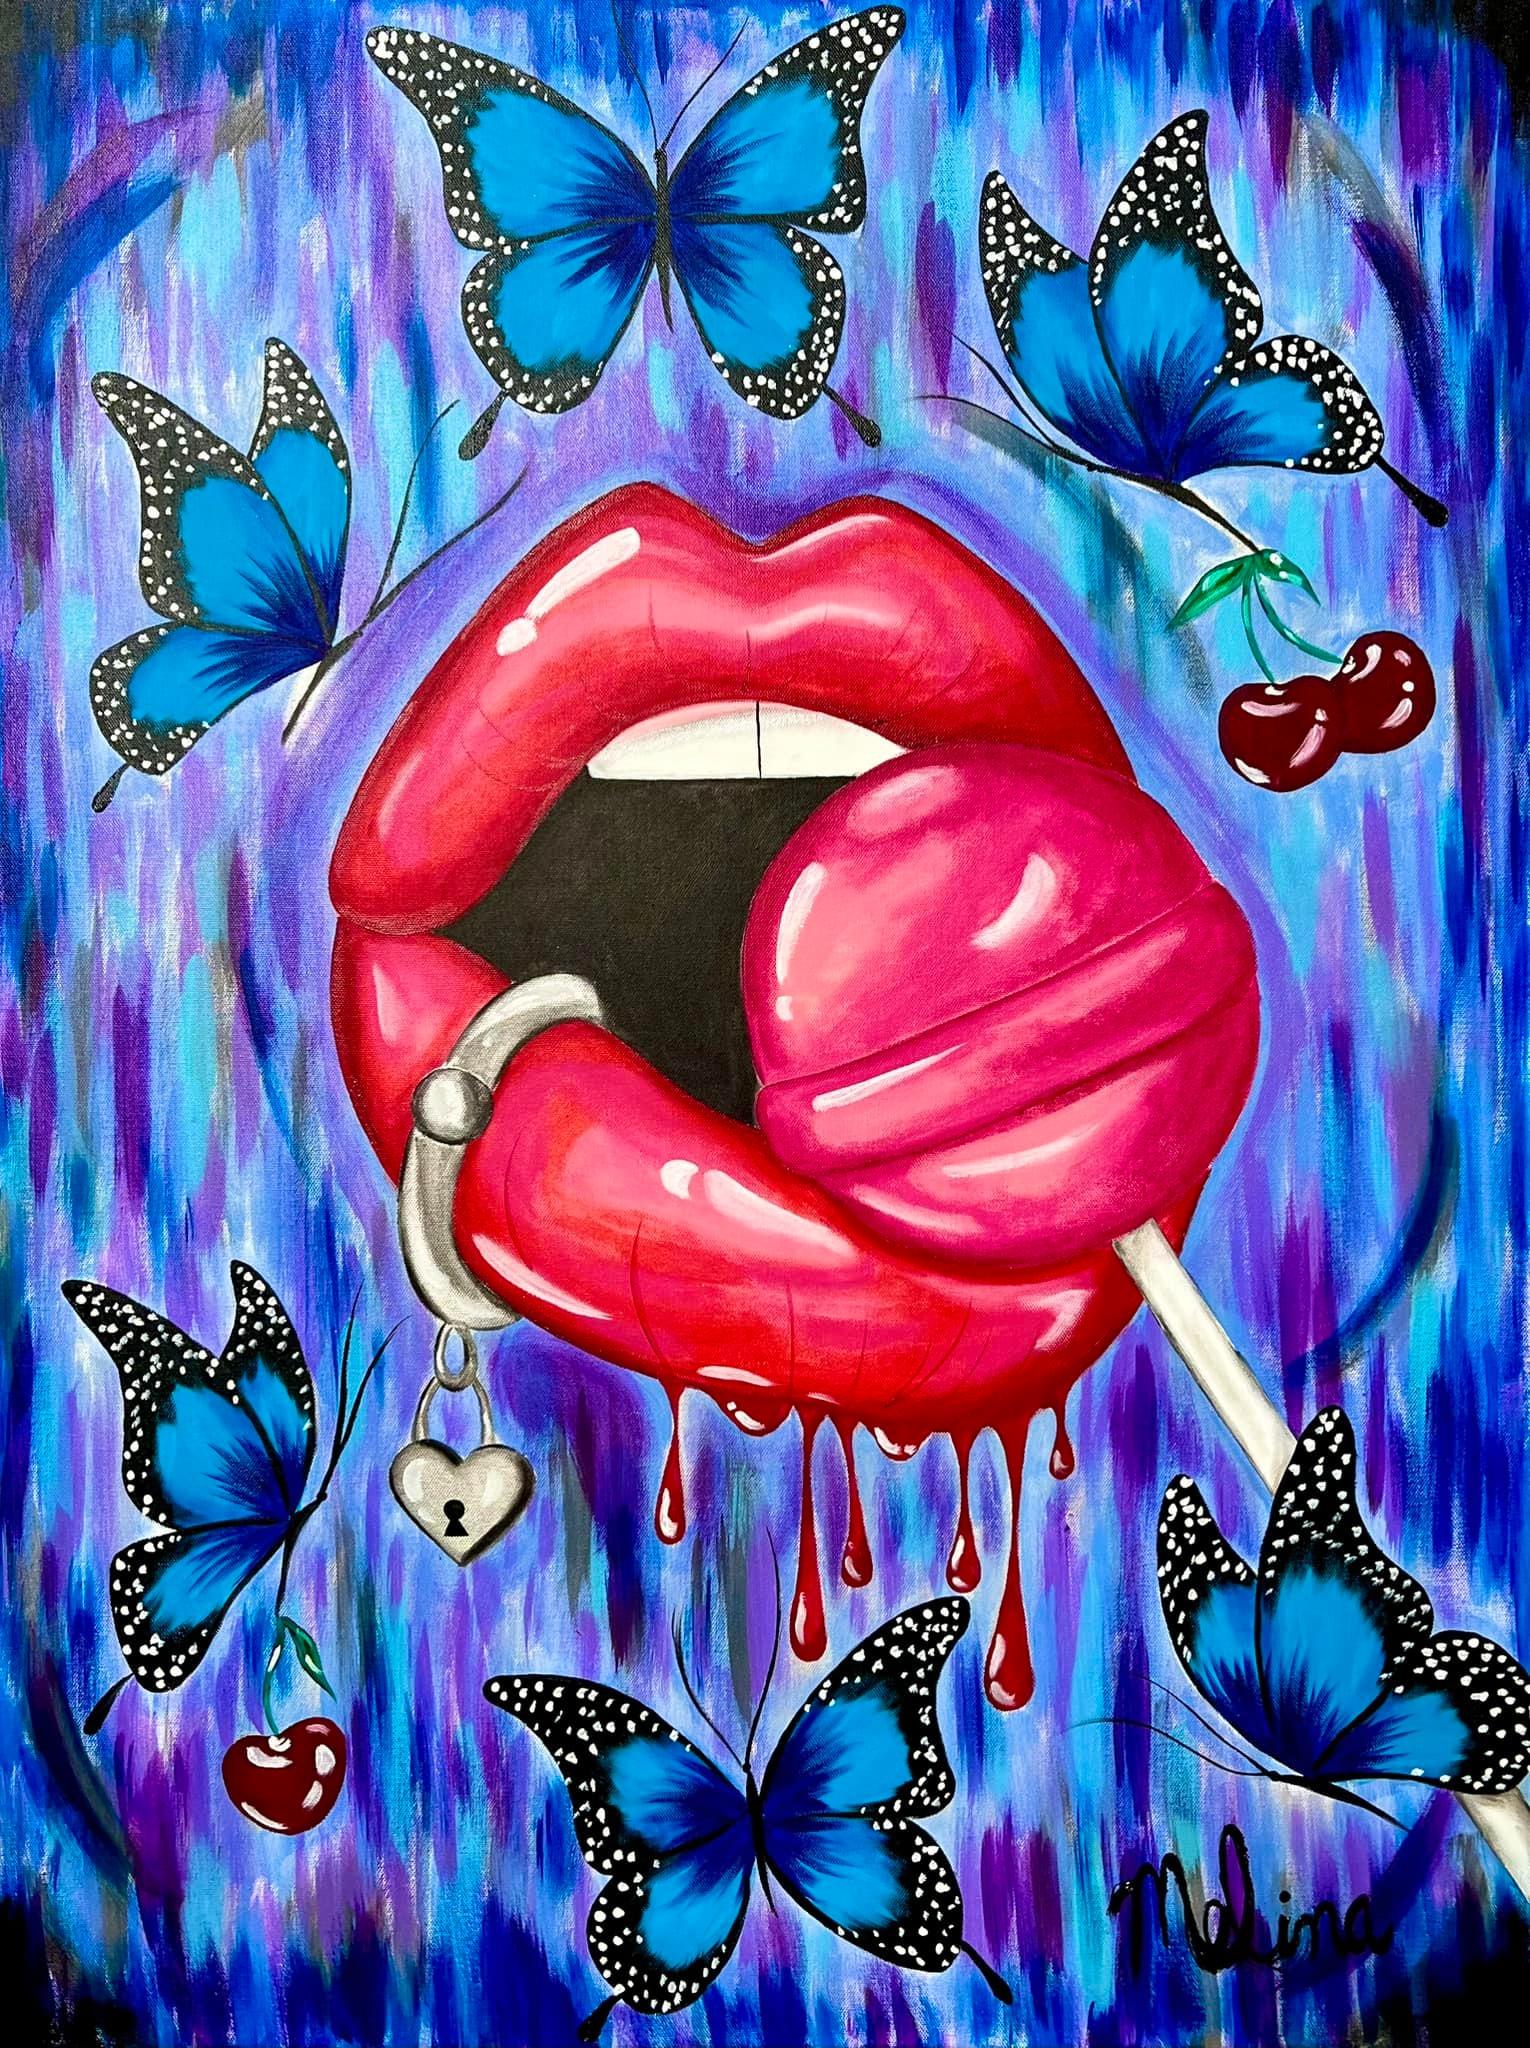 Sugar Coated Kiss by Melina Sobi - Painting by Unknown